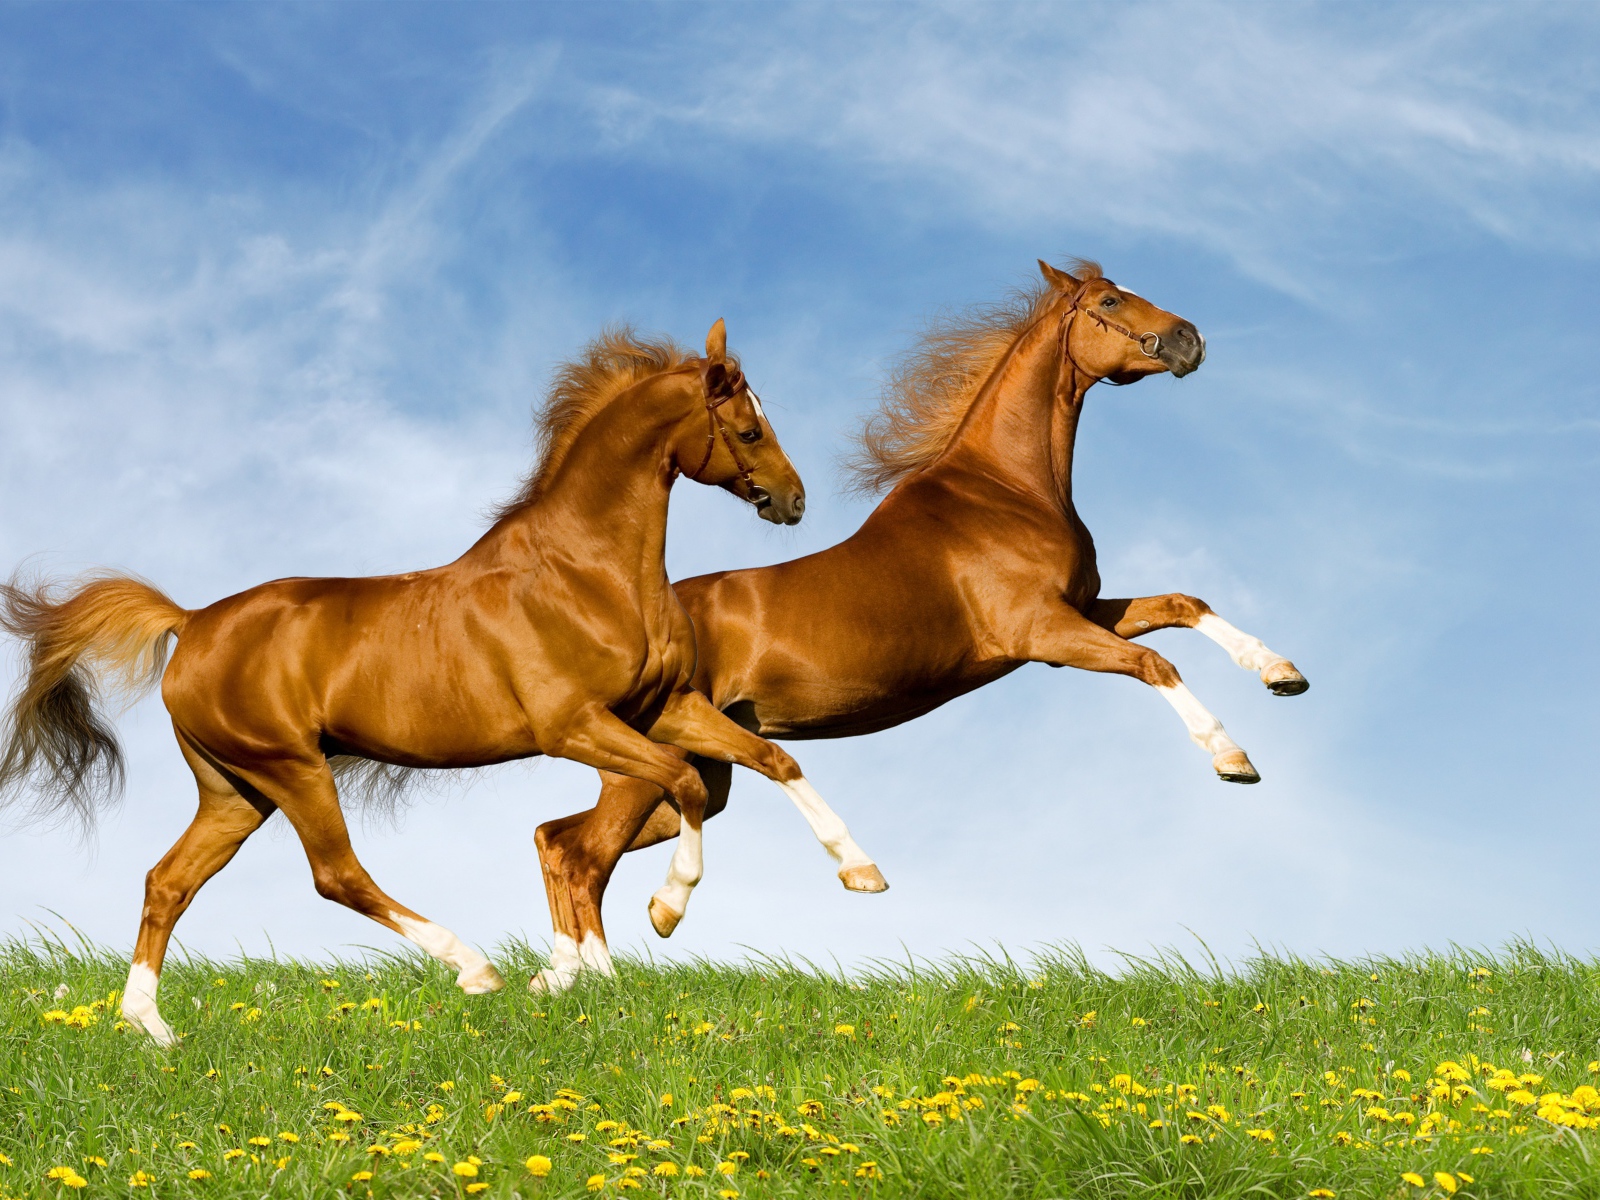 A pair of horses running across a field against a blue sky background